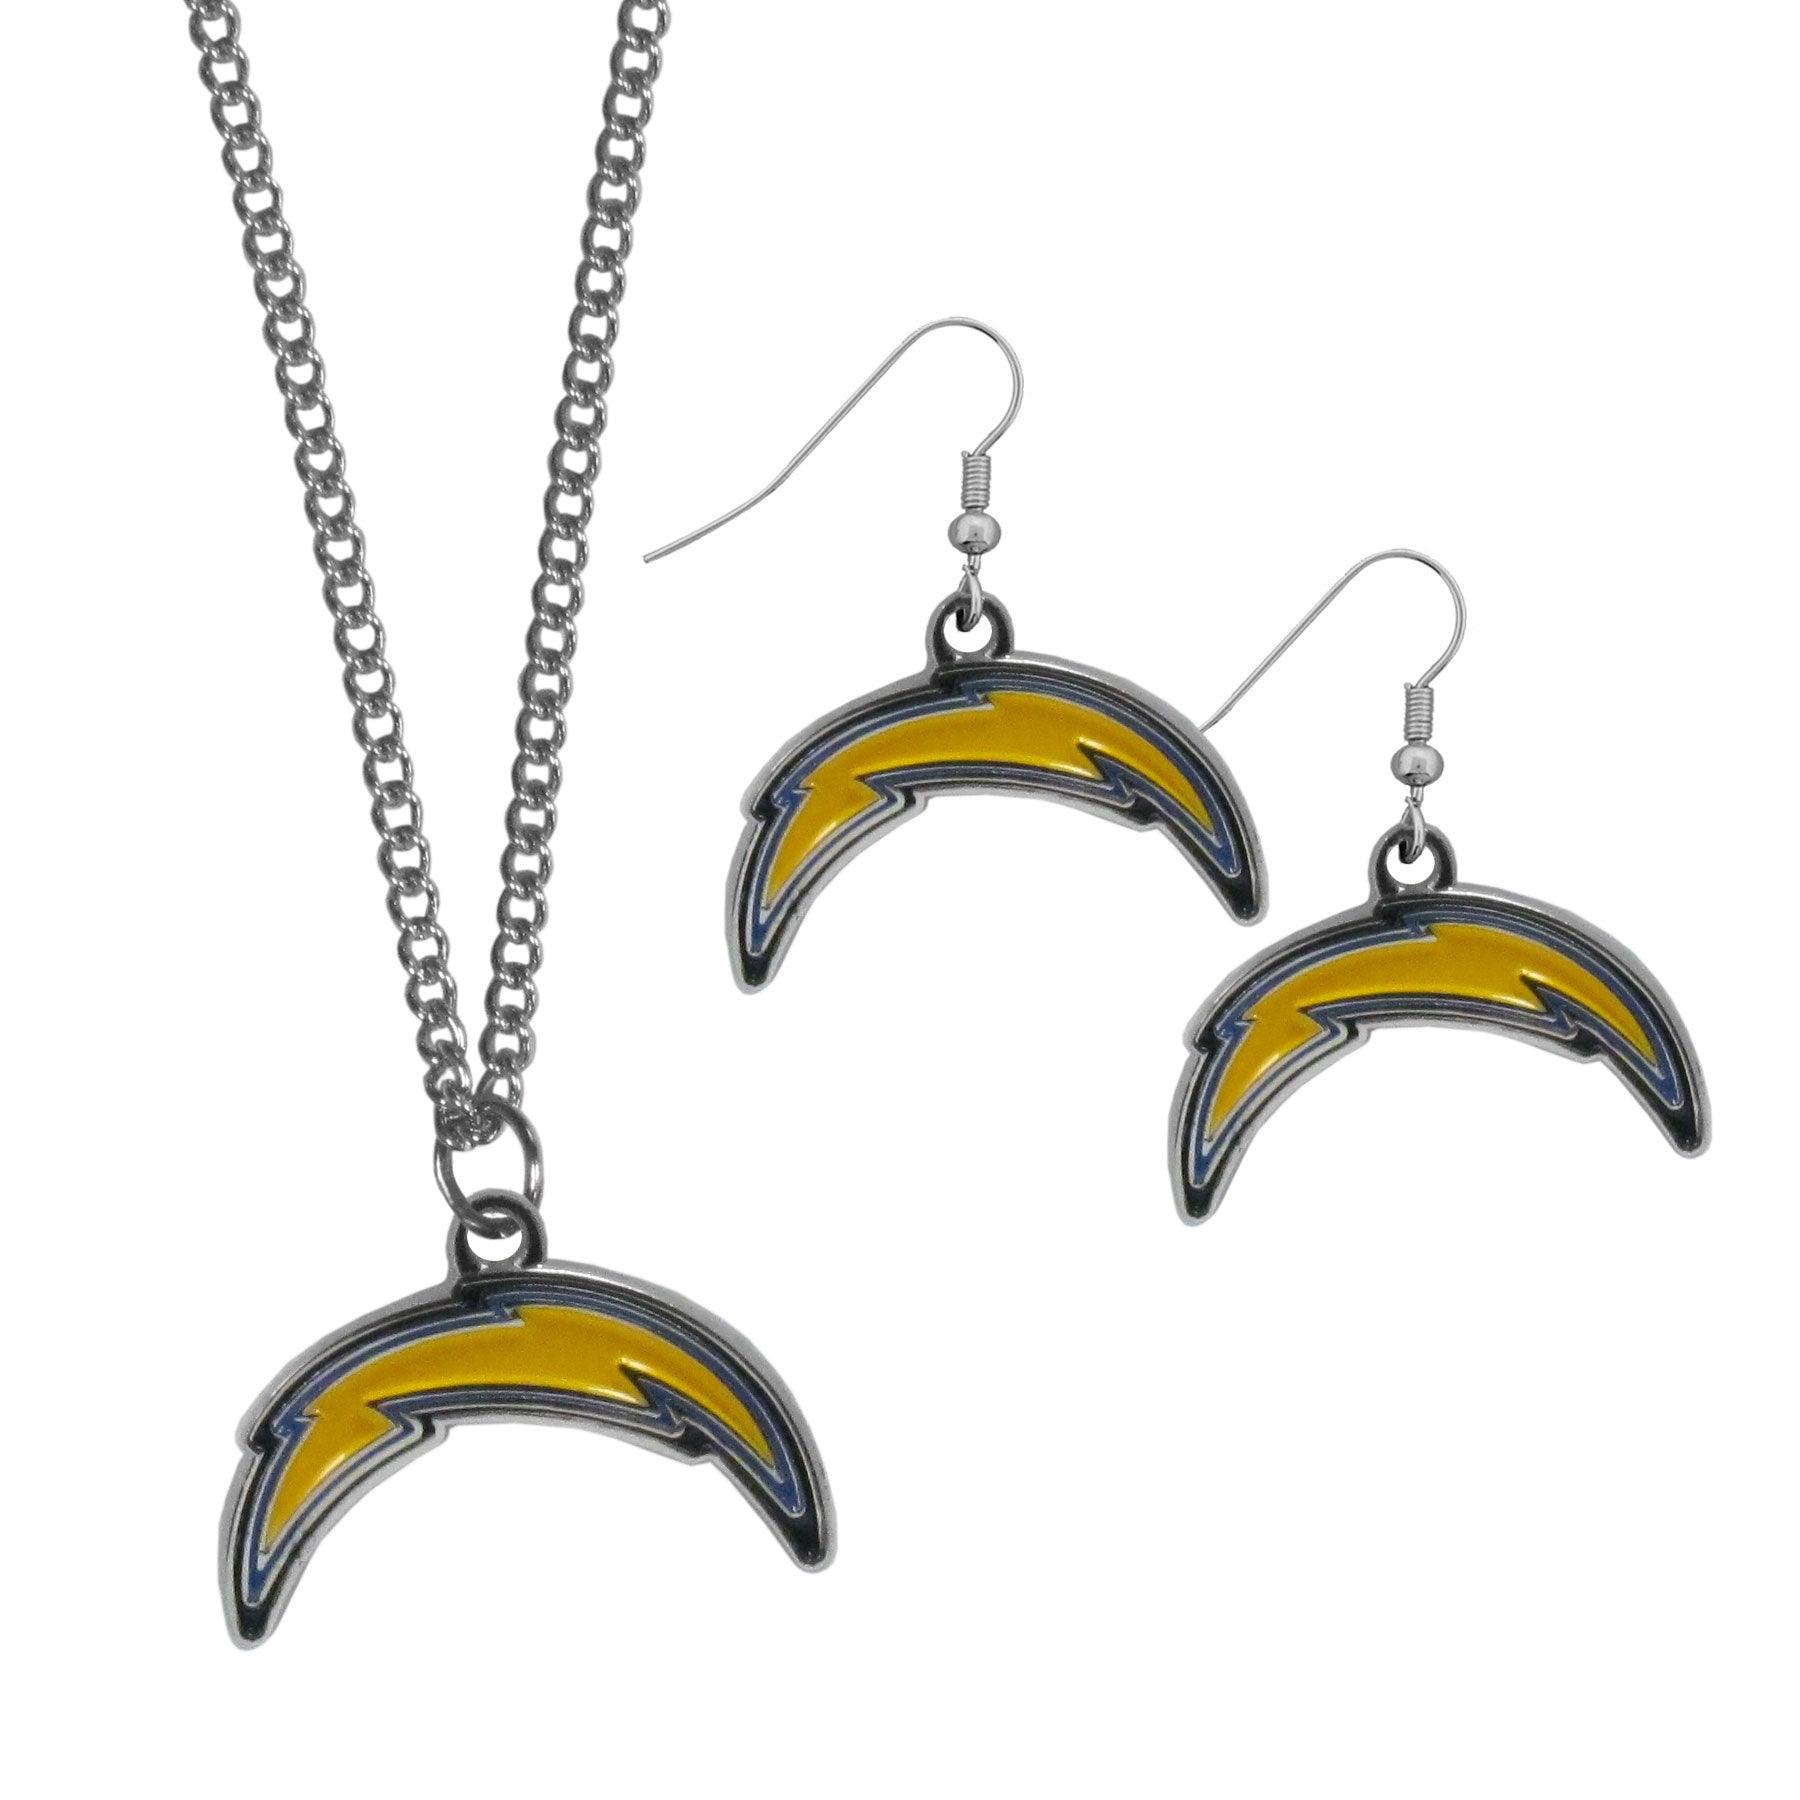 Los Angeles Chargers Dangle Earrings and Chain Necklace Set - Flyclothing LLC